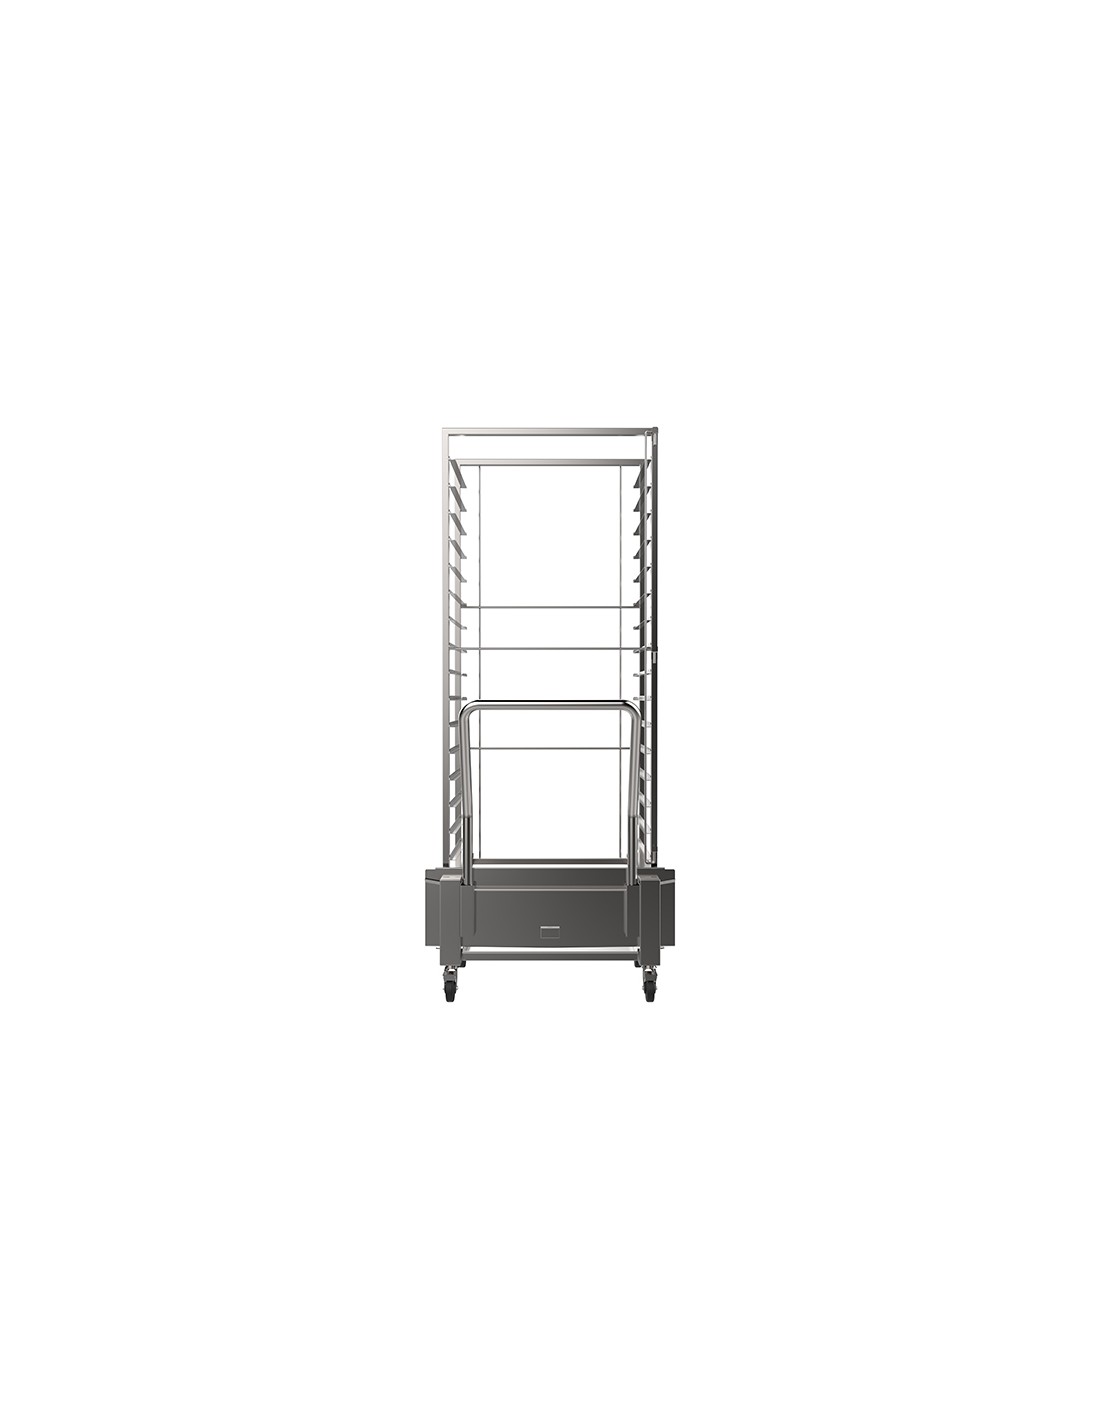 Retractable trolley - Acciaio inox AISI 304 - Ergonomic grip - Removable - Braking wheels - For ovens 16 pans - Dime